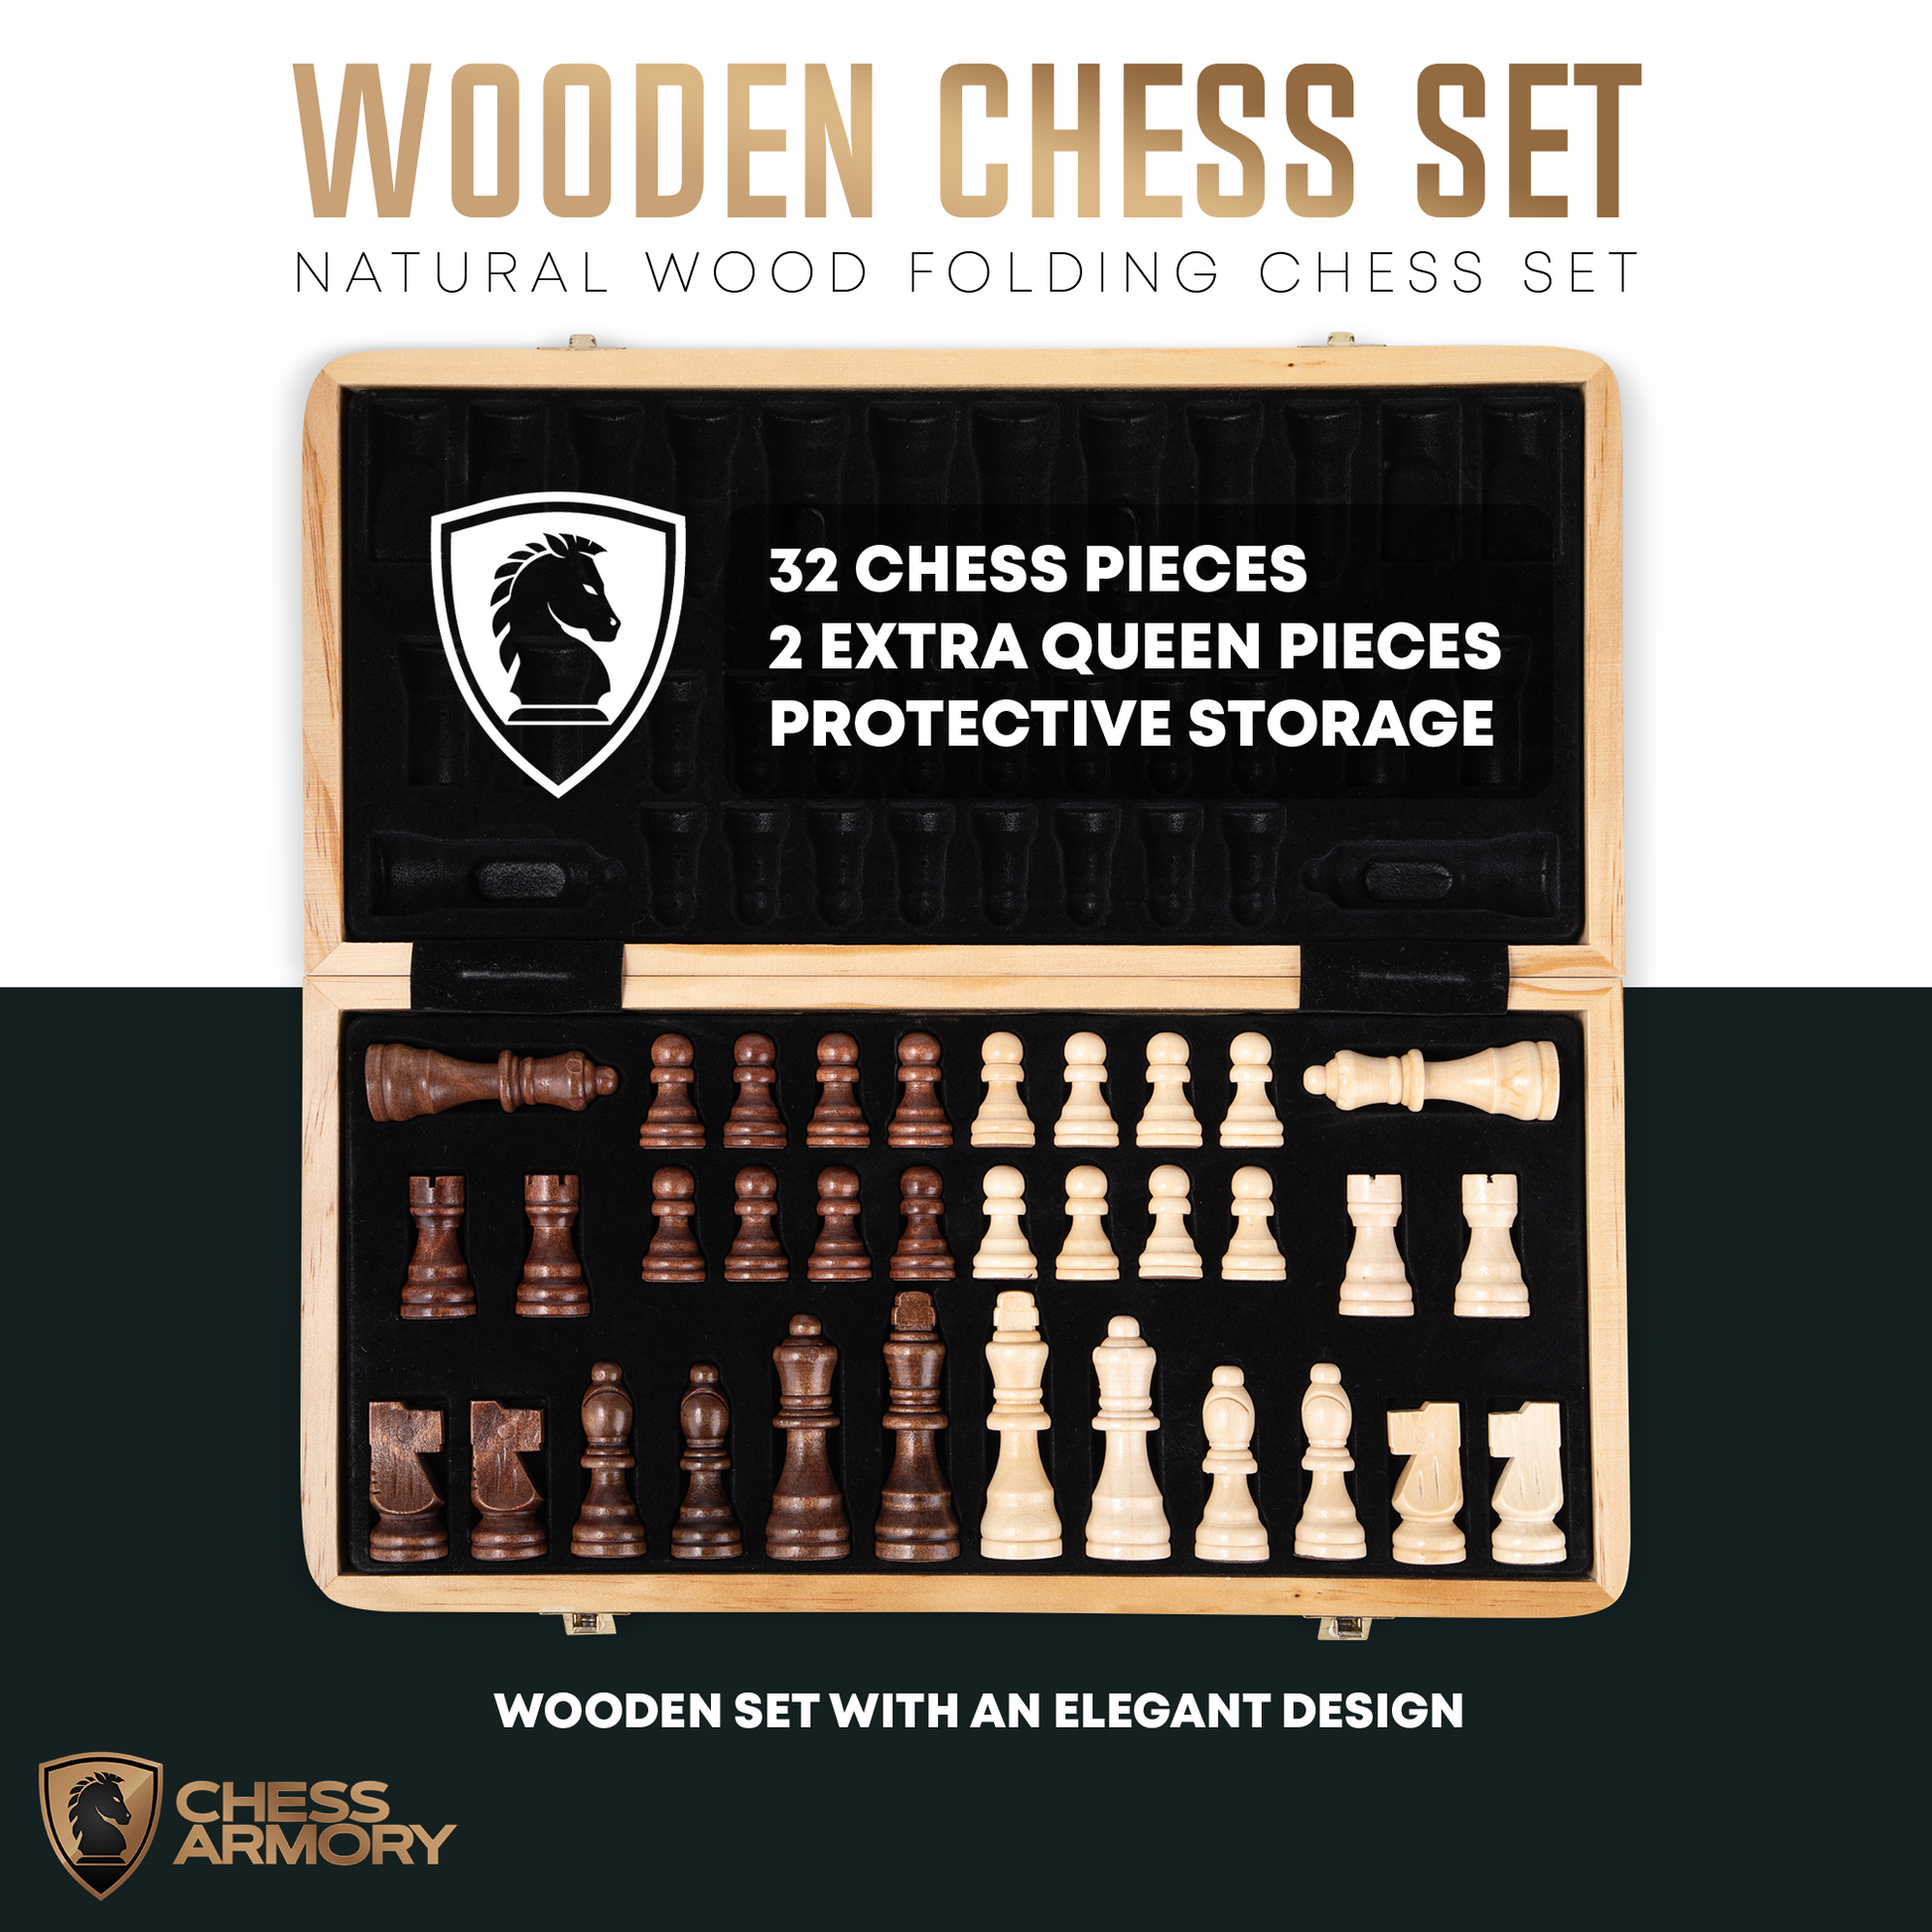 Walnut Chess Set 15'' x 15'' with Felted Game Board Interior for Storage  Chess Game for Child & Adult, 2 players